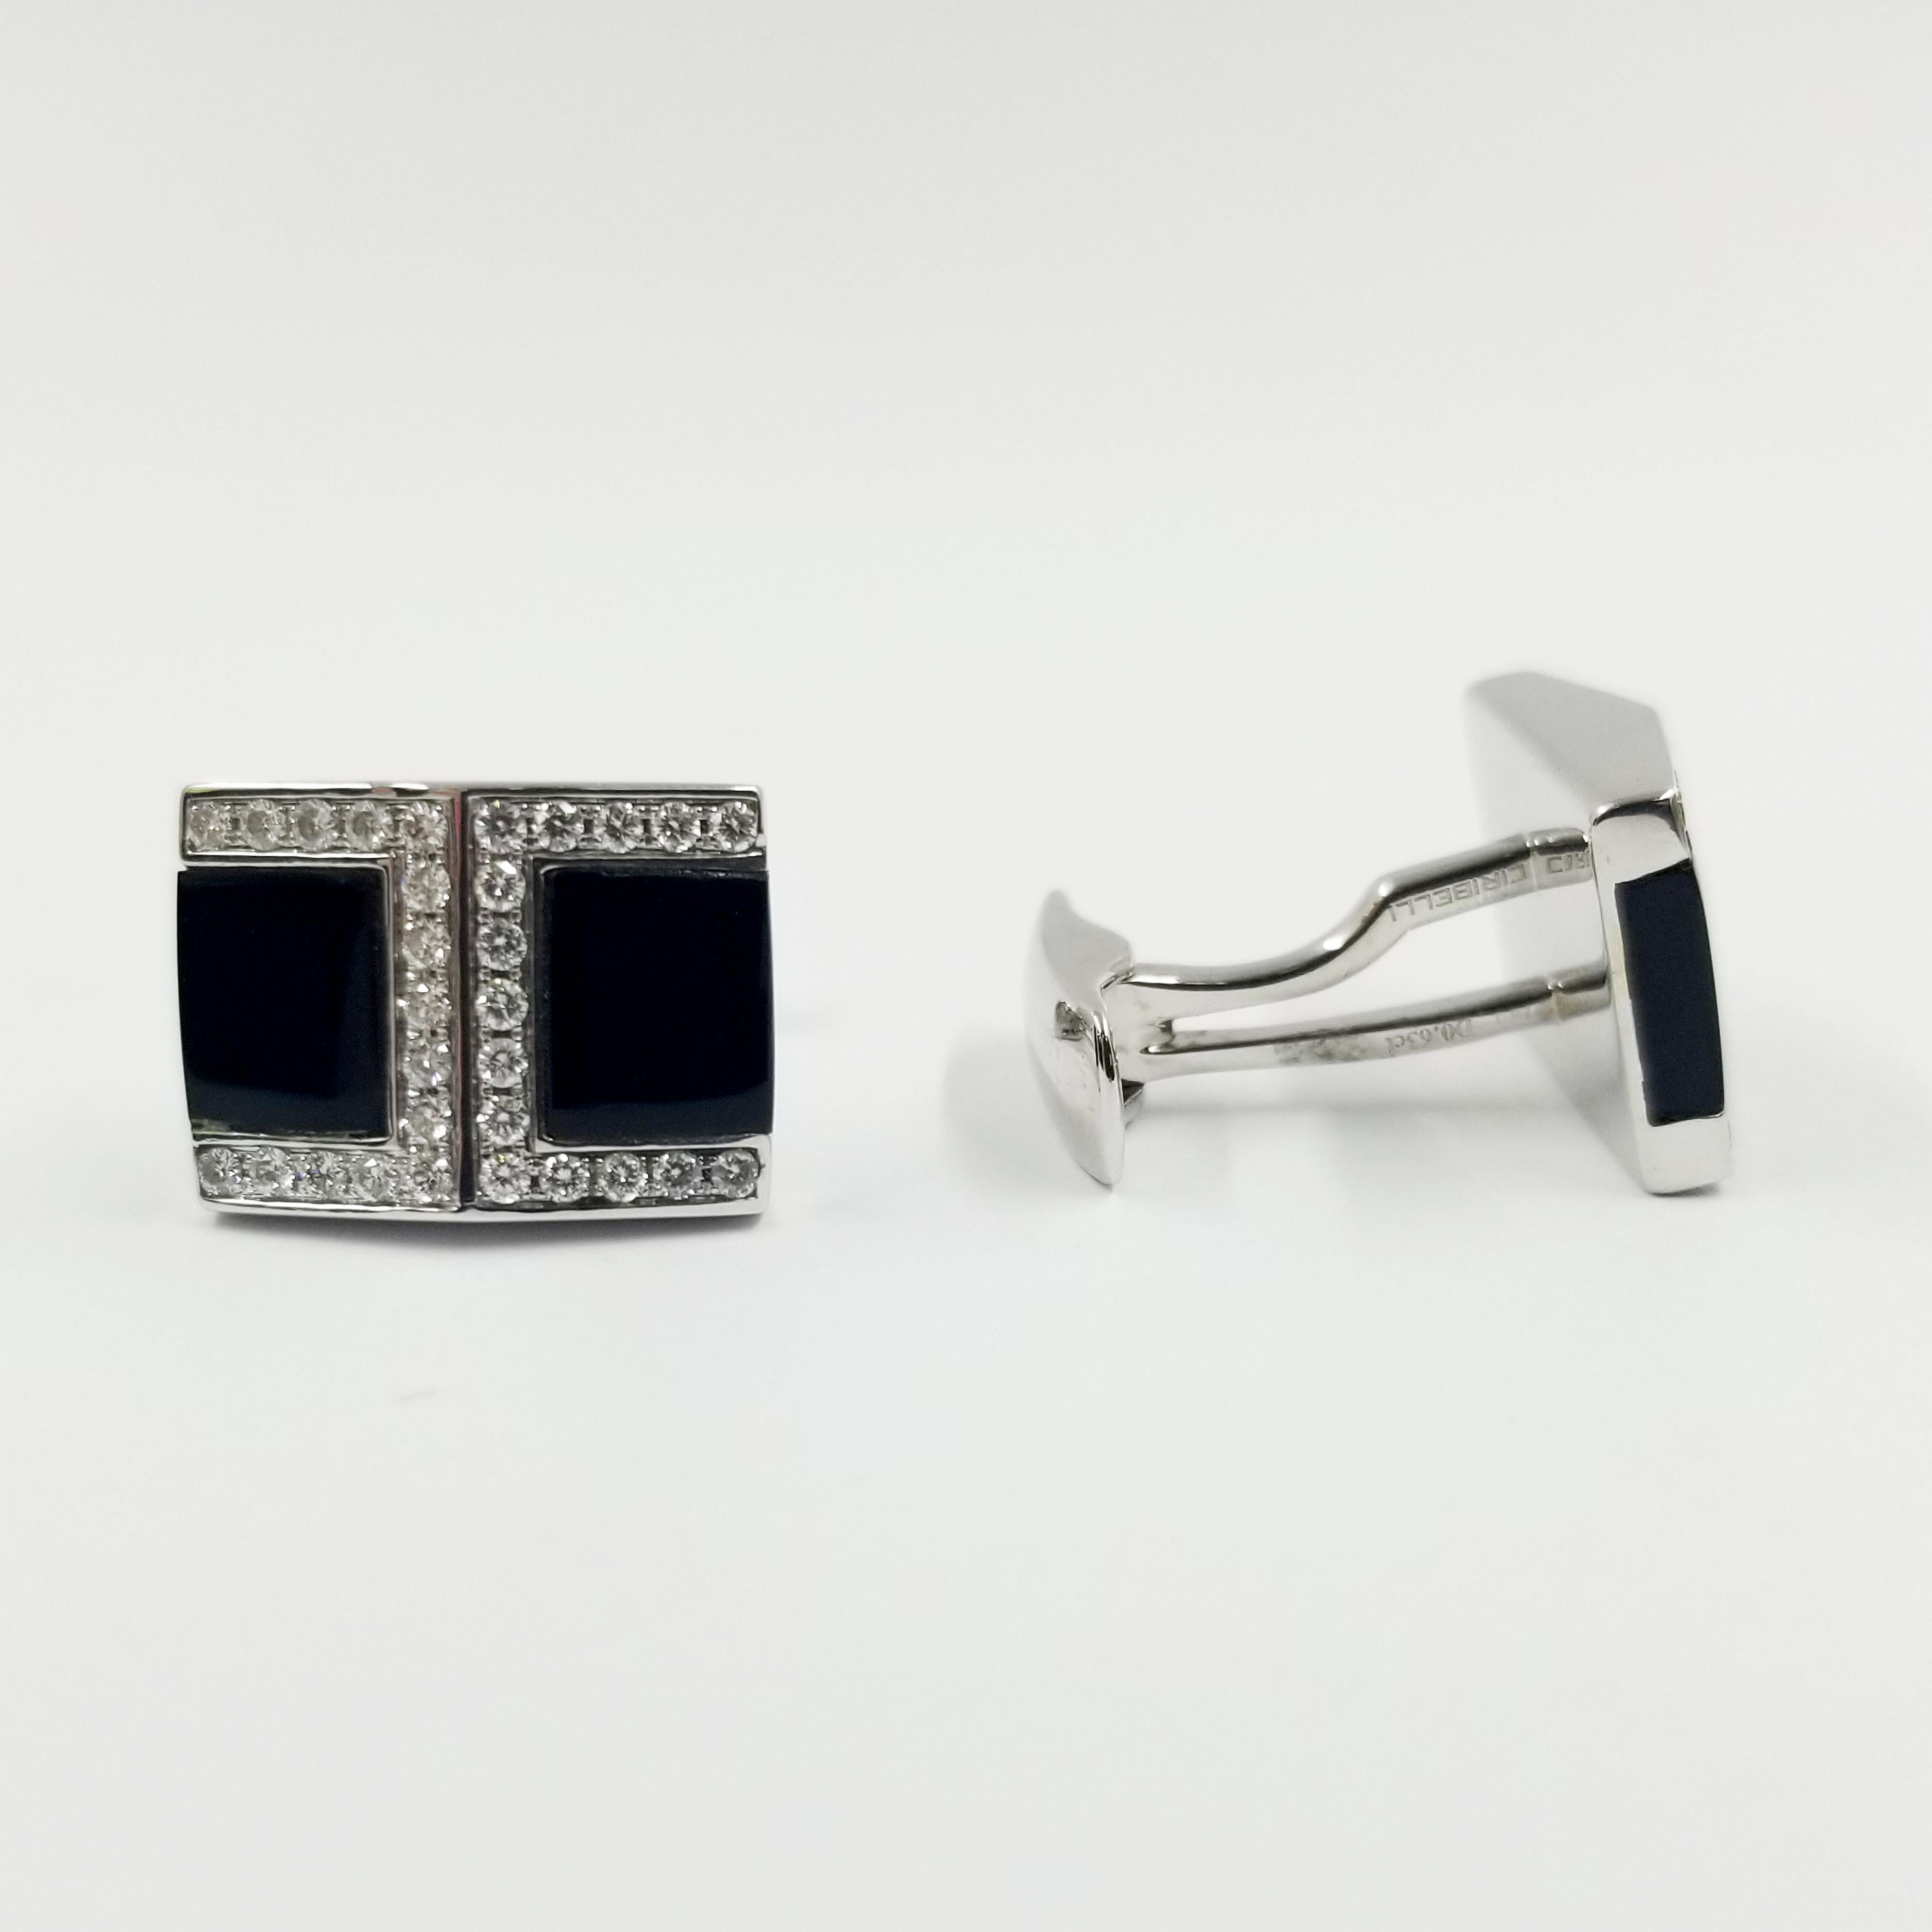 18 Karat White Gold Cufflinks from Fine Jeweler, Ciribelli of Monte Carlo
60 Round Diamonds Total 0.63 Carat Total Weight
VS Clarity & G Color
Specialty Cut Black Onyx
Torpedo Style Backs
Stamped 